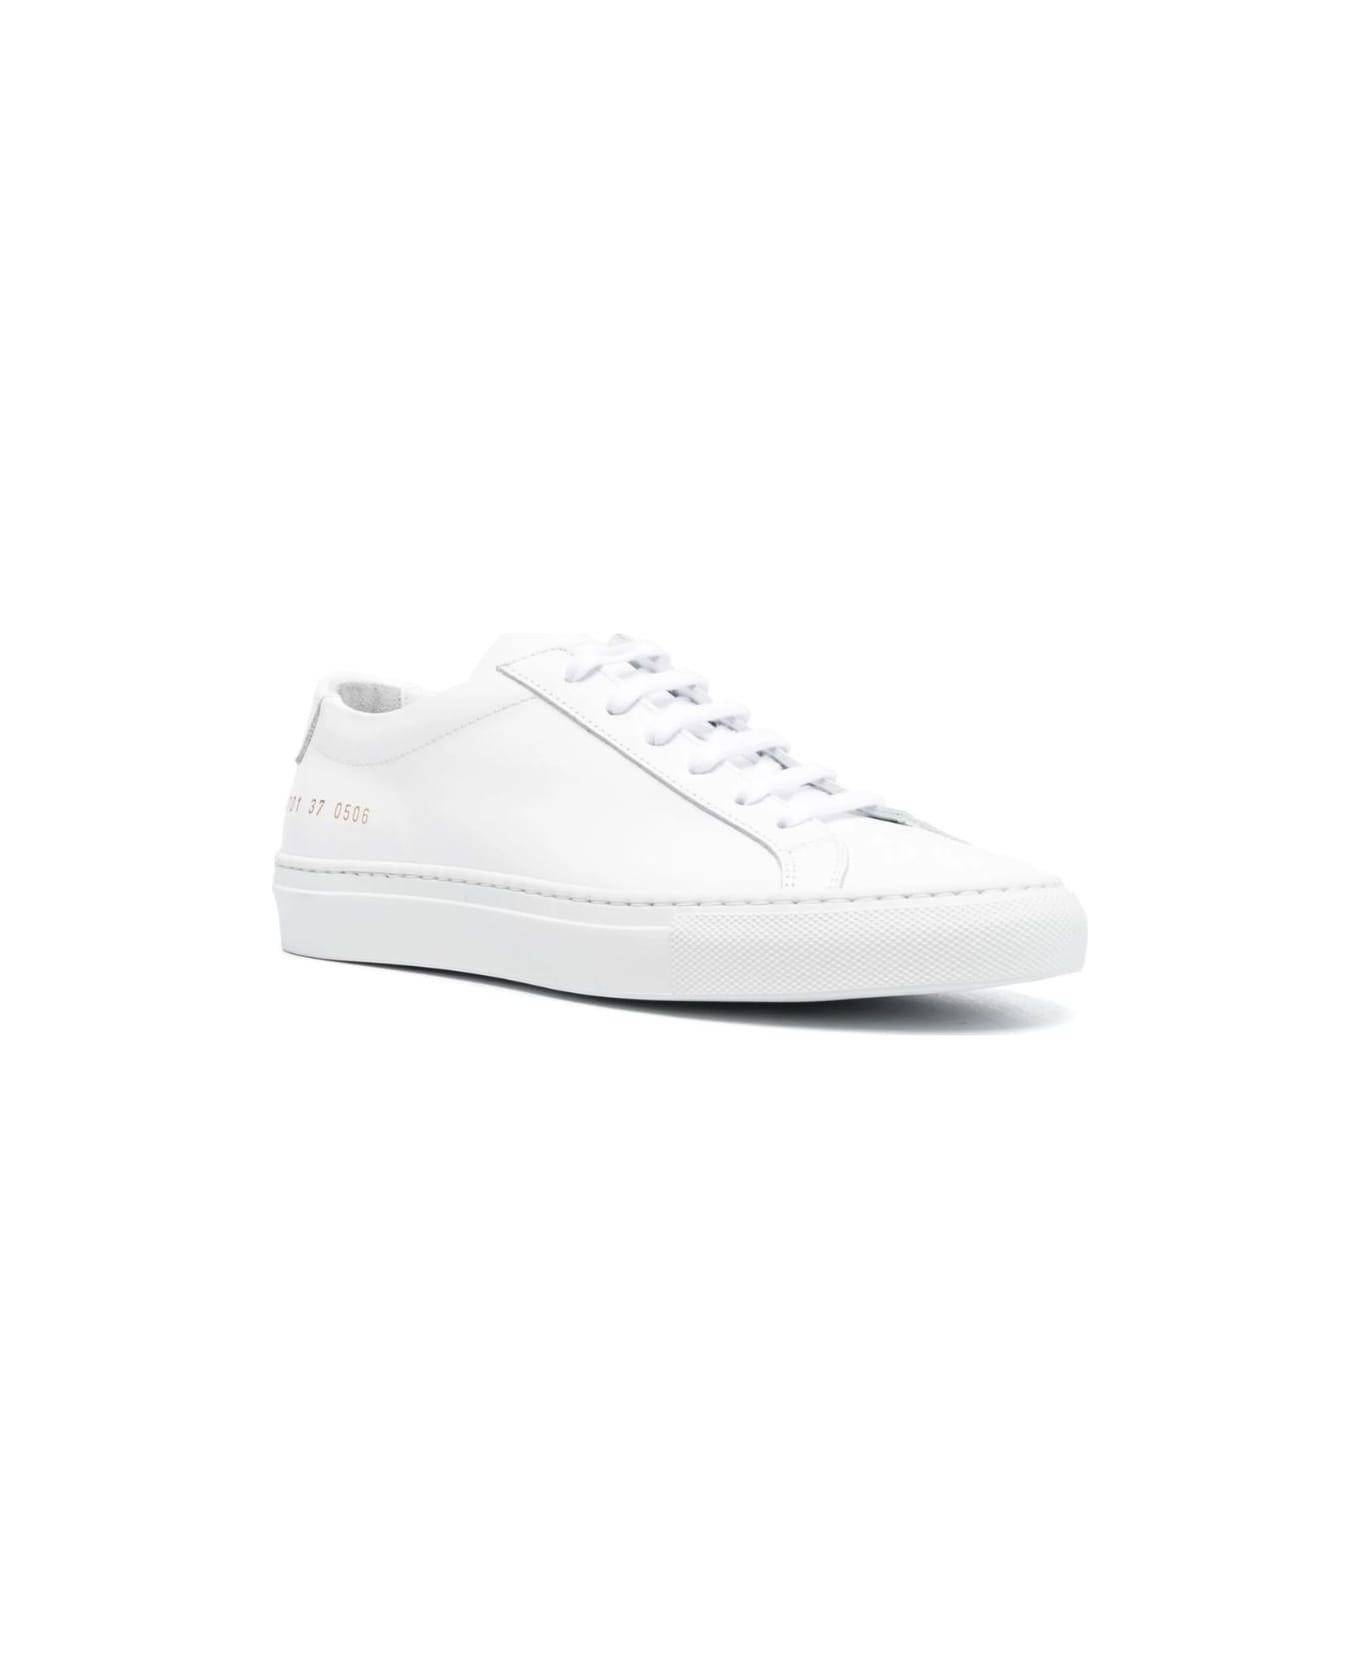 Common Projects Original Achilles Low Sneaker - White スニーカー